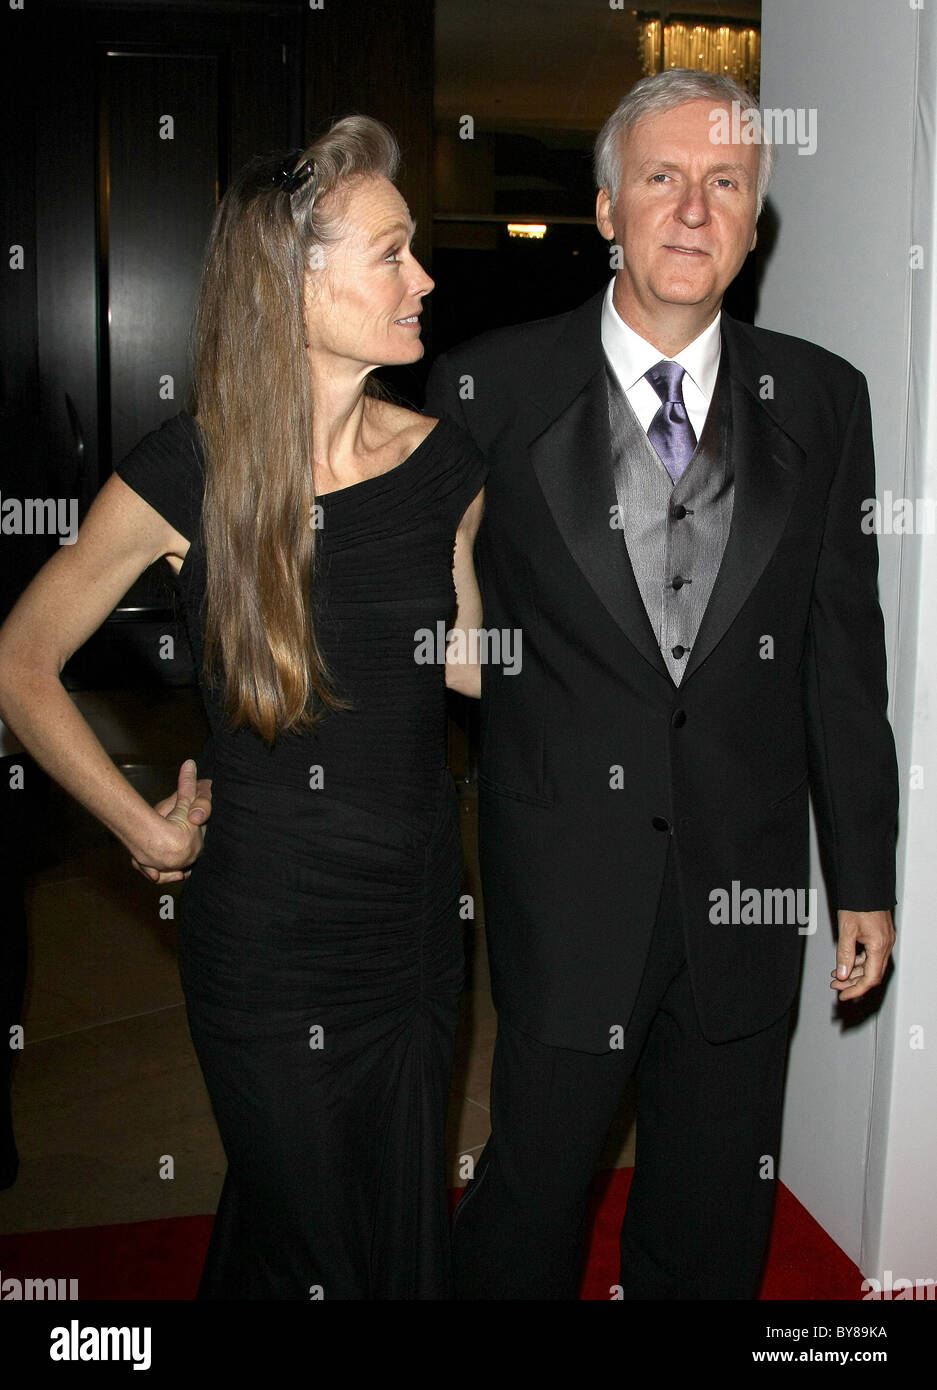 SUZY AMIS JAMES CAMERON 22ND ANNUAL PRODUCERS GUILD OF AMERICA AWARDS BEVERLY HILLS LOS ANGELES CALIFORNIA USA 22 January 20 Stock Photo